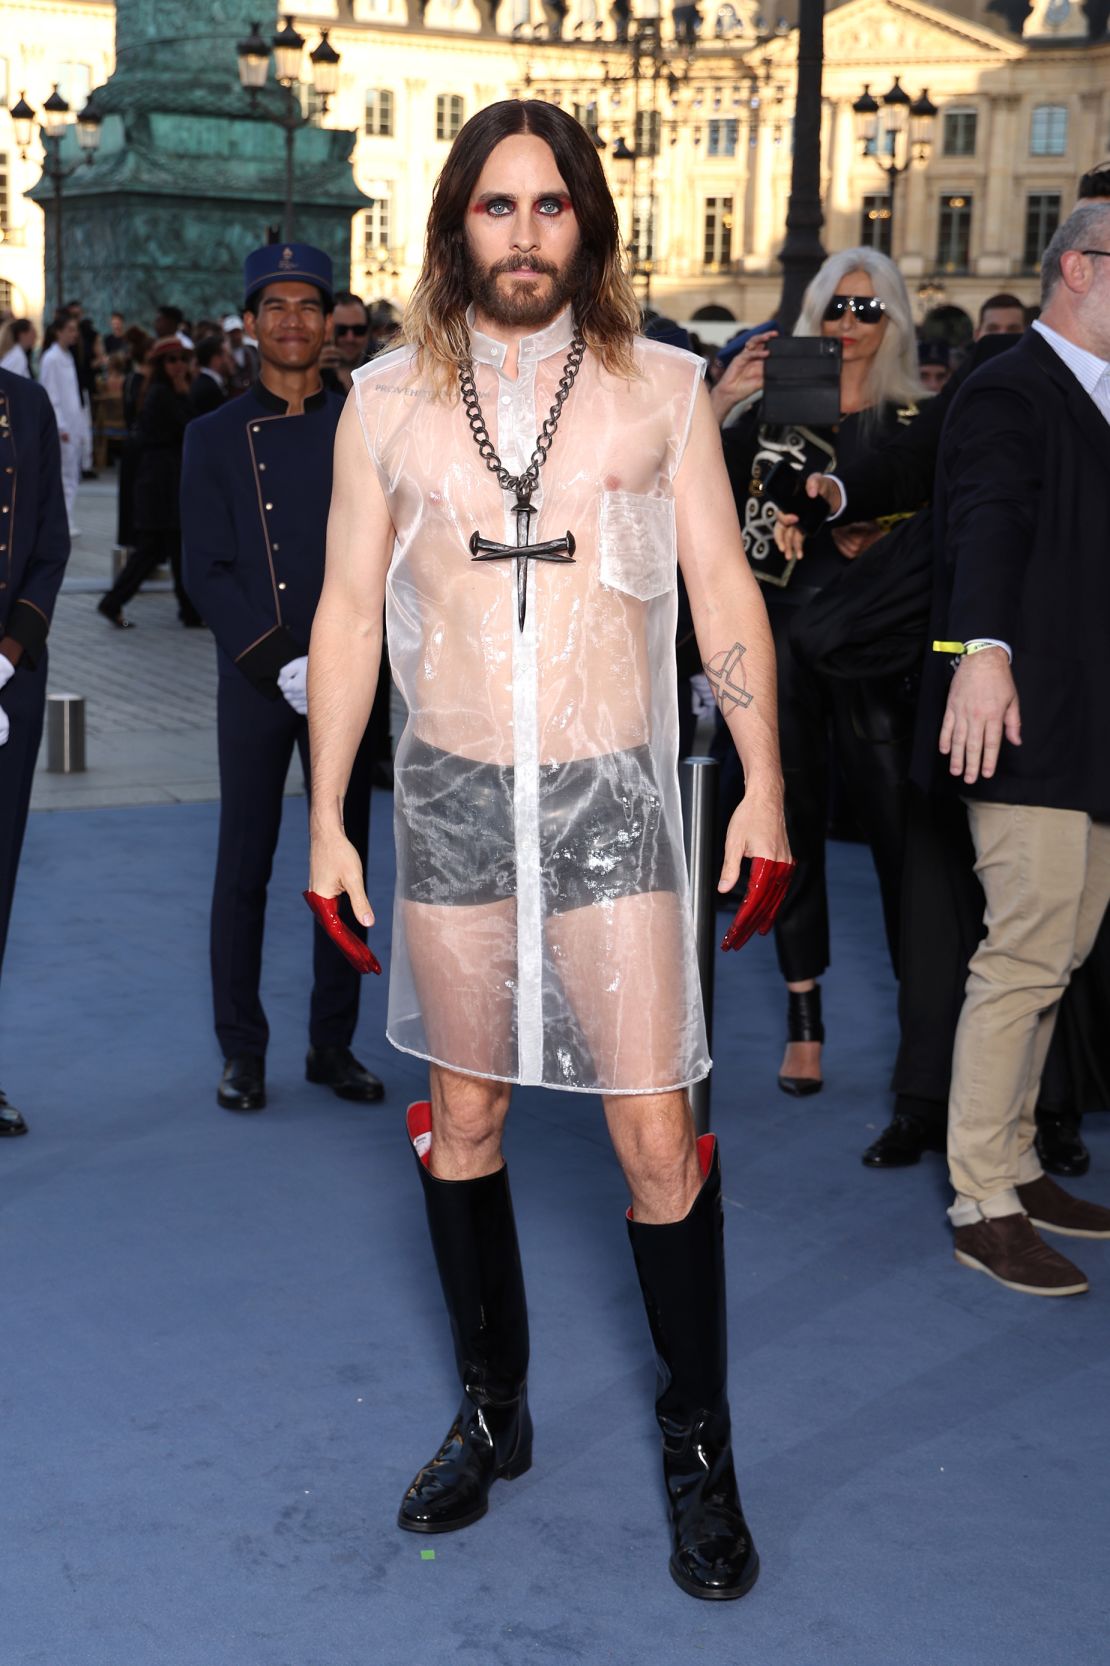 Jared Leto was seen in a translucent tunic at the same event.